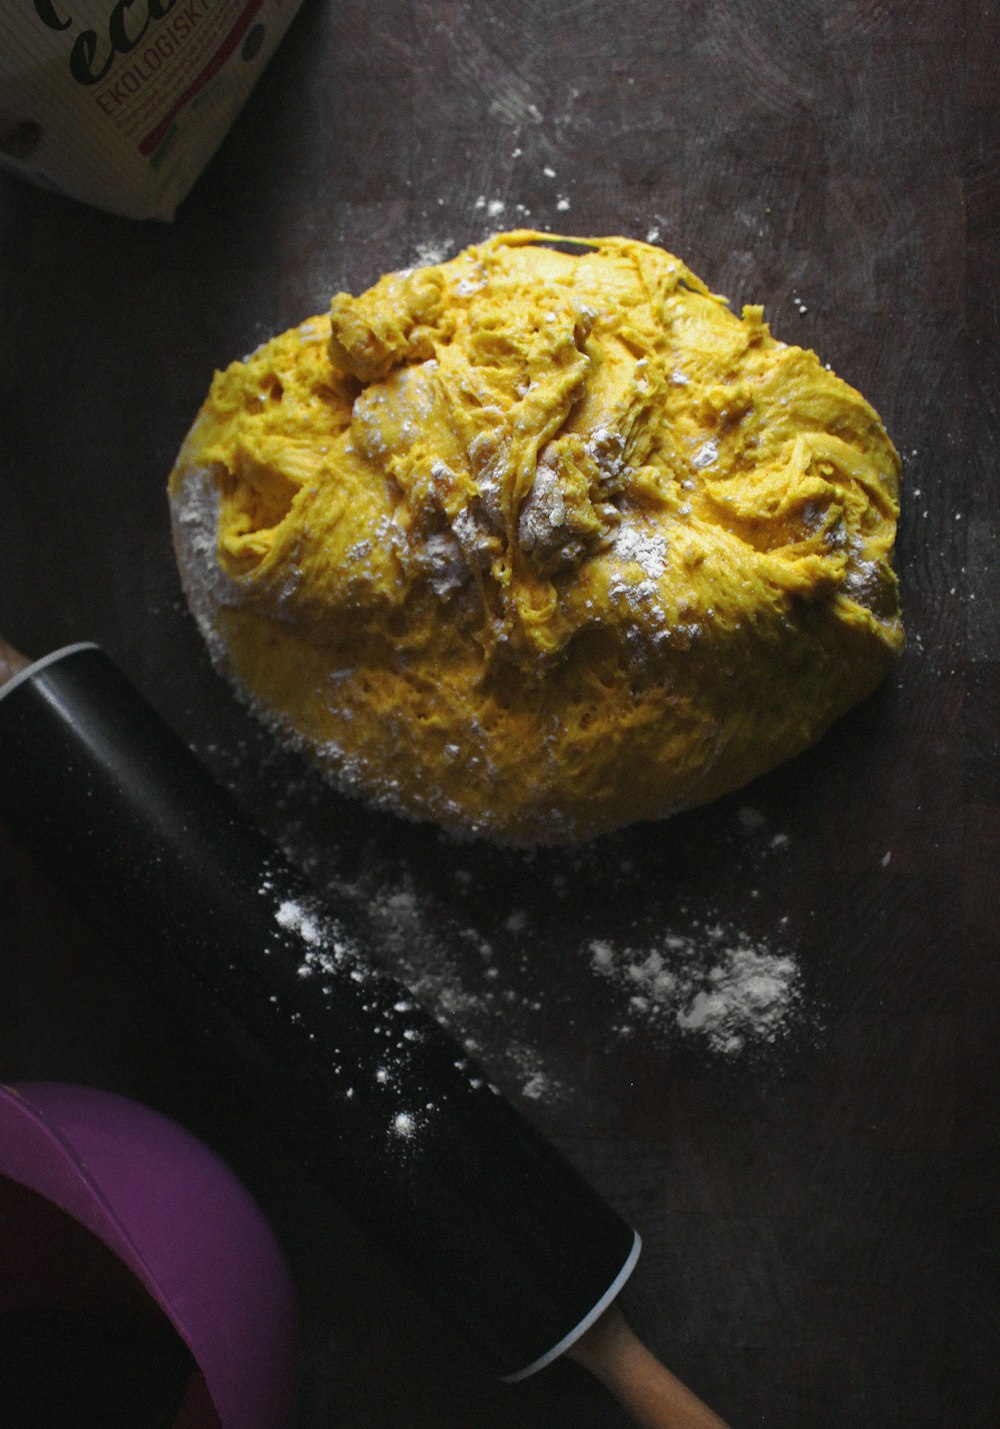 a ball of dough sitting on top of a table next to a knife